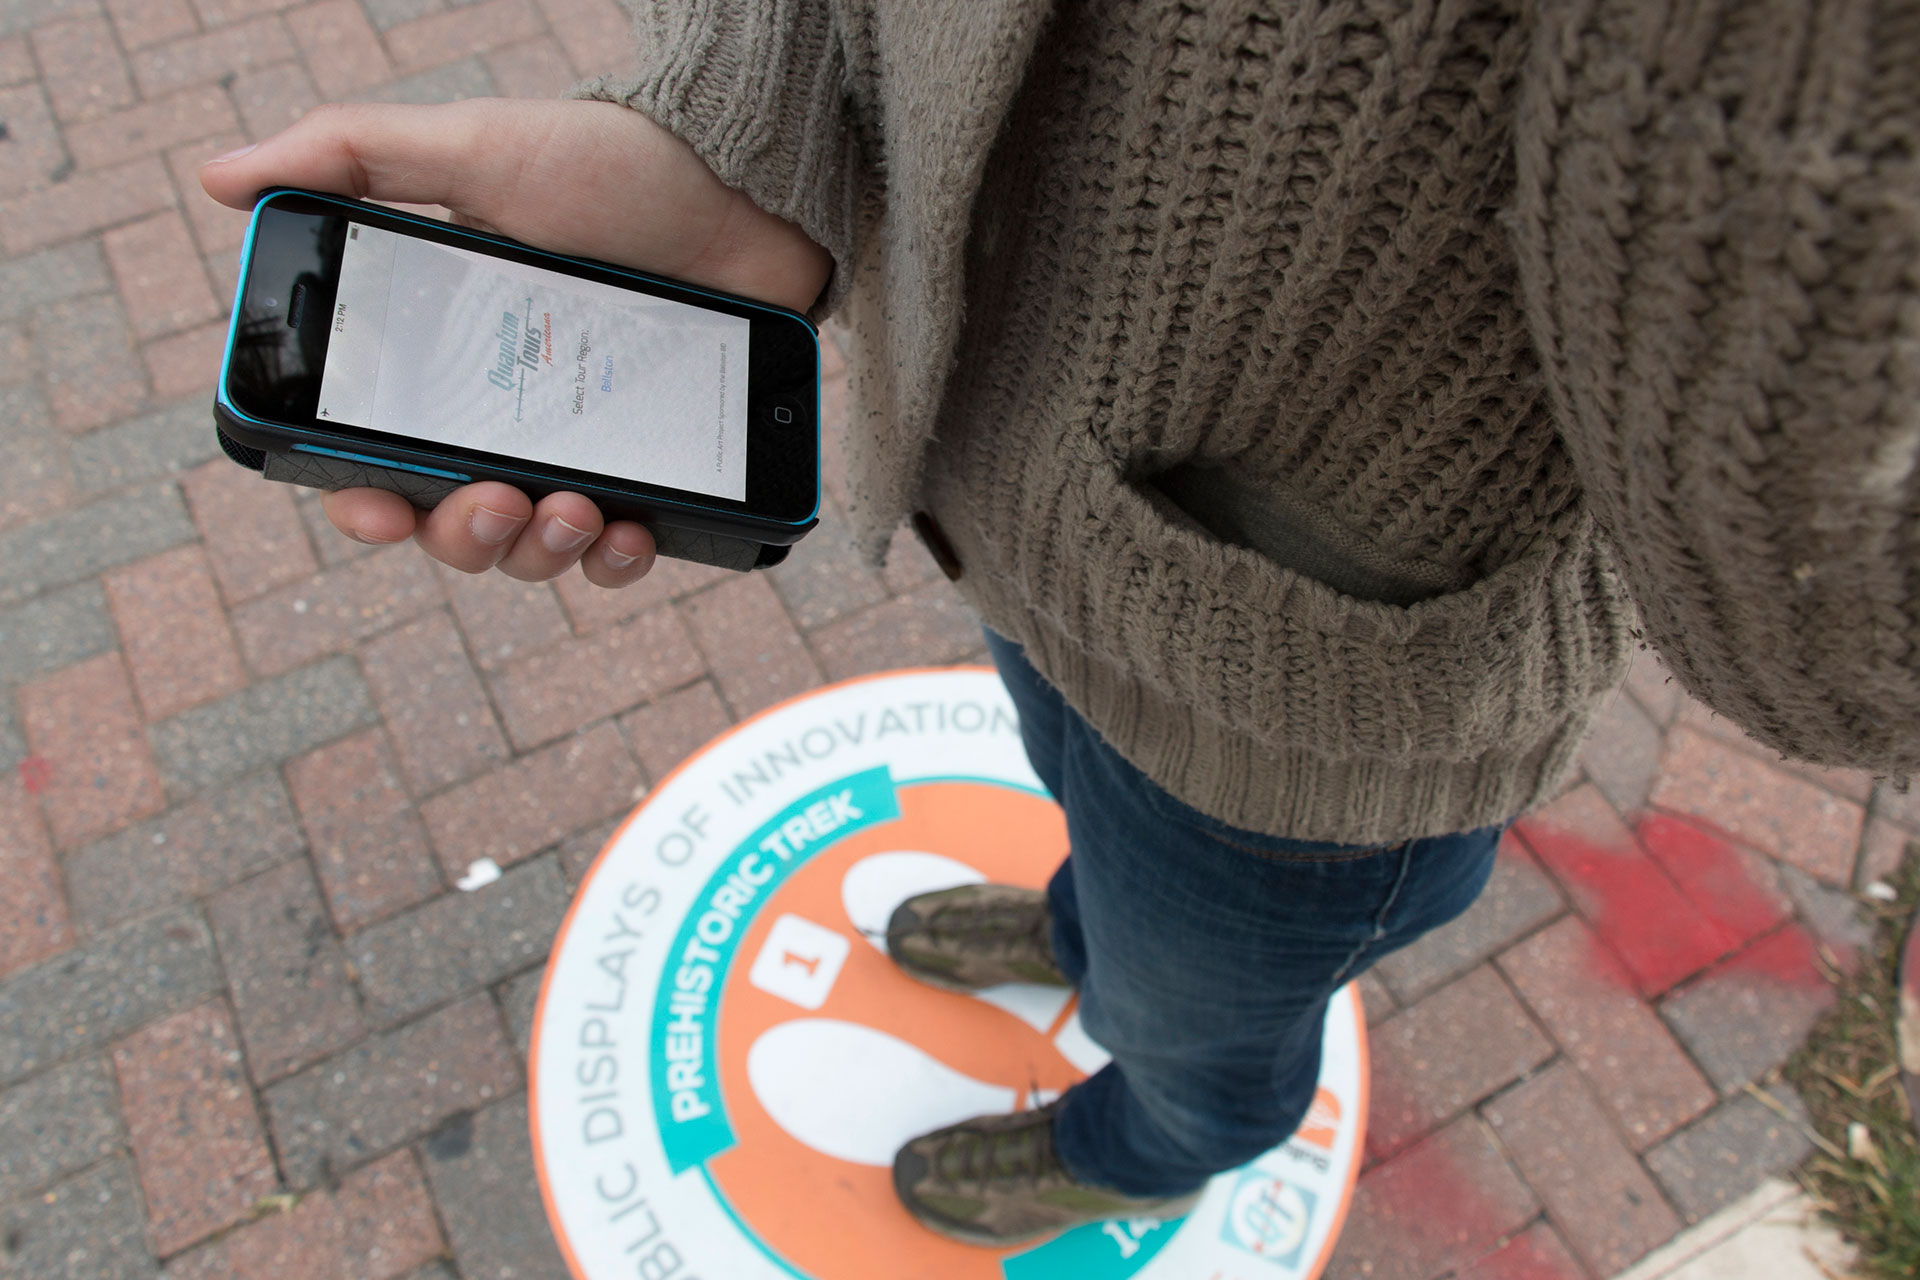 A photo of a woman holding a smartphone while standing on a round sidewalk decal.